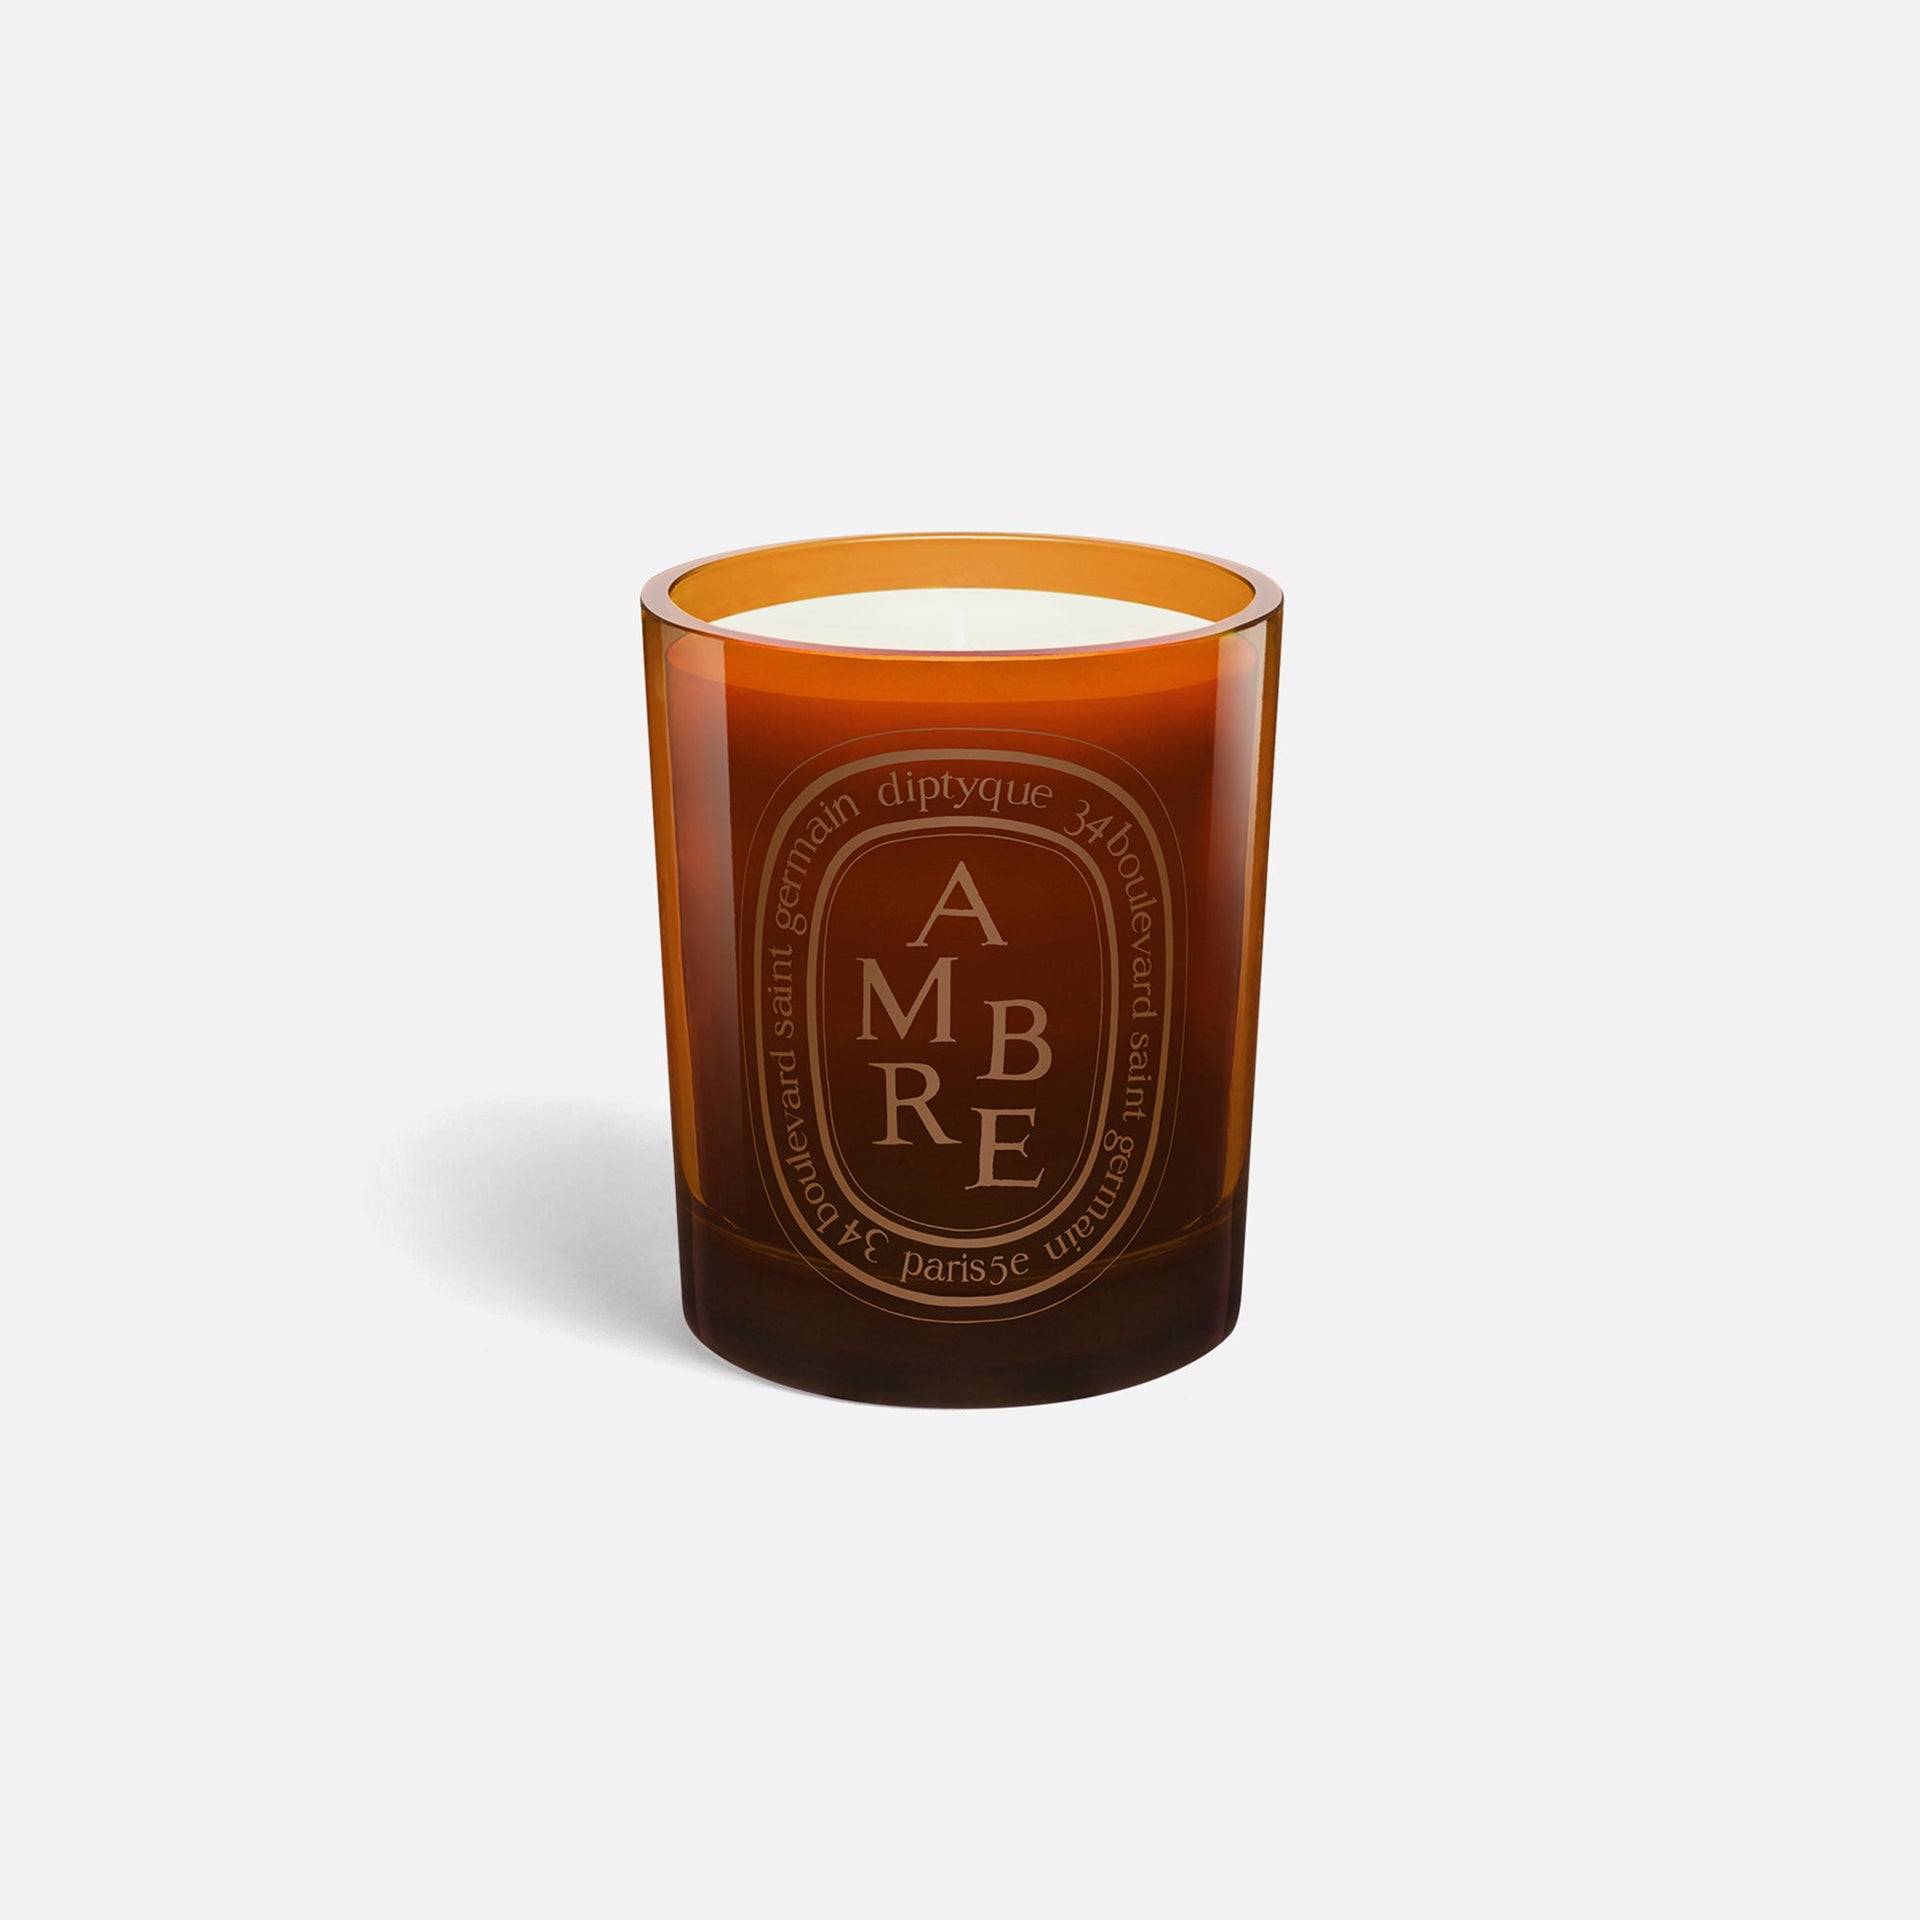 Diptyque Amber 300g Scented Candle